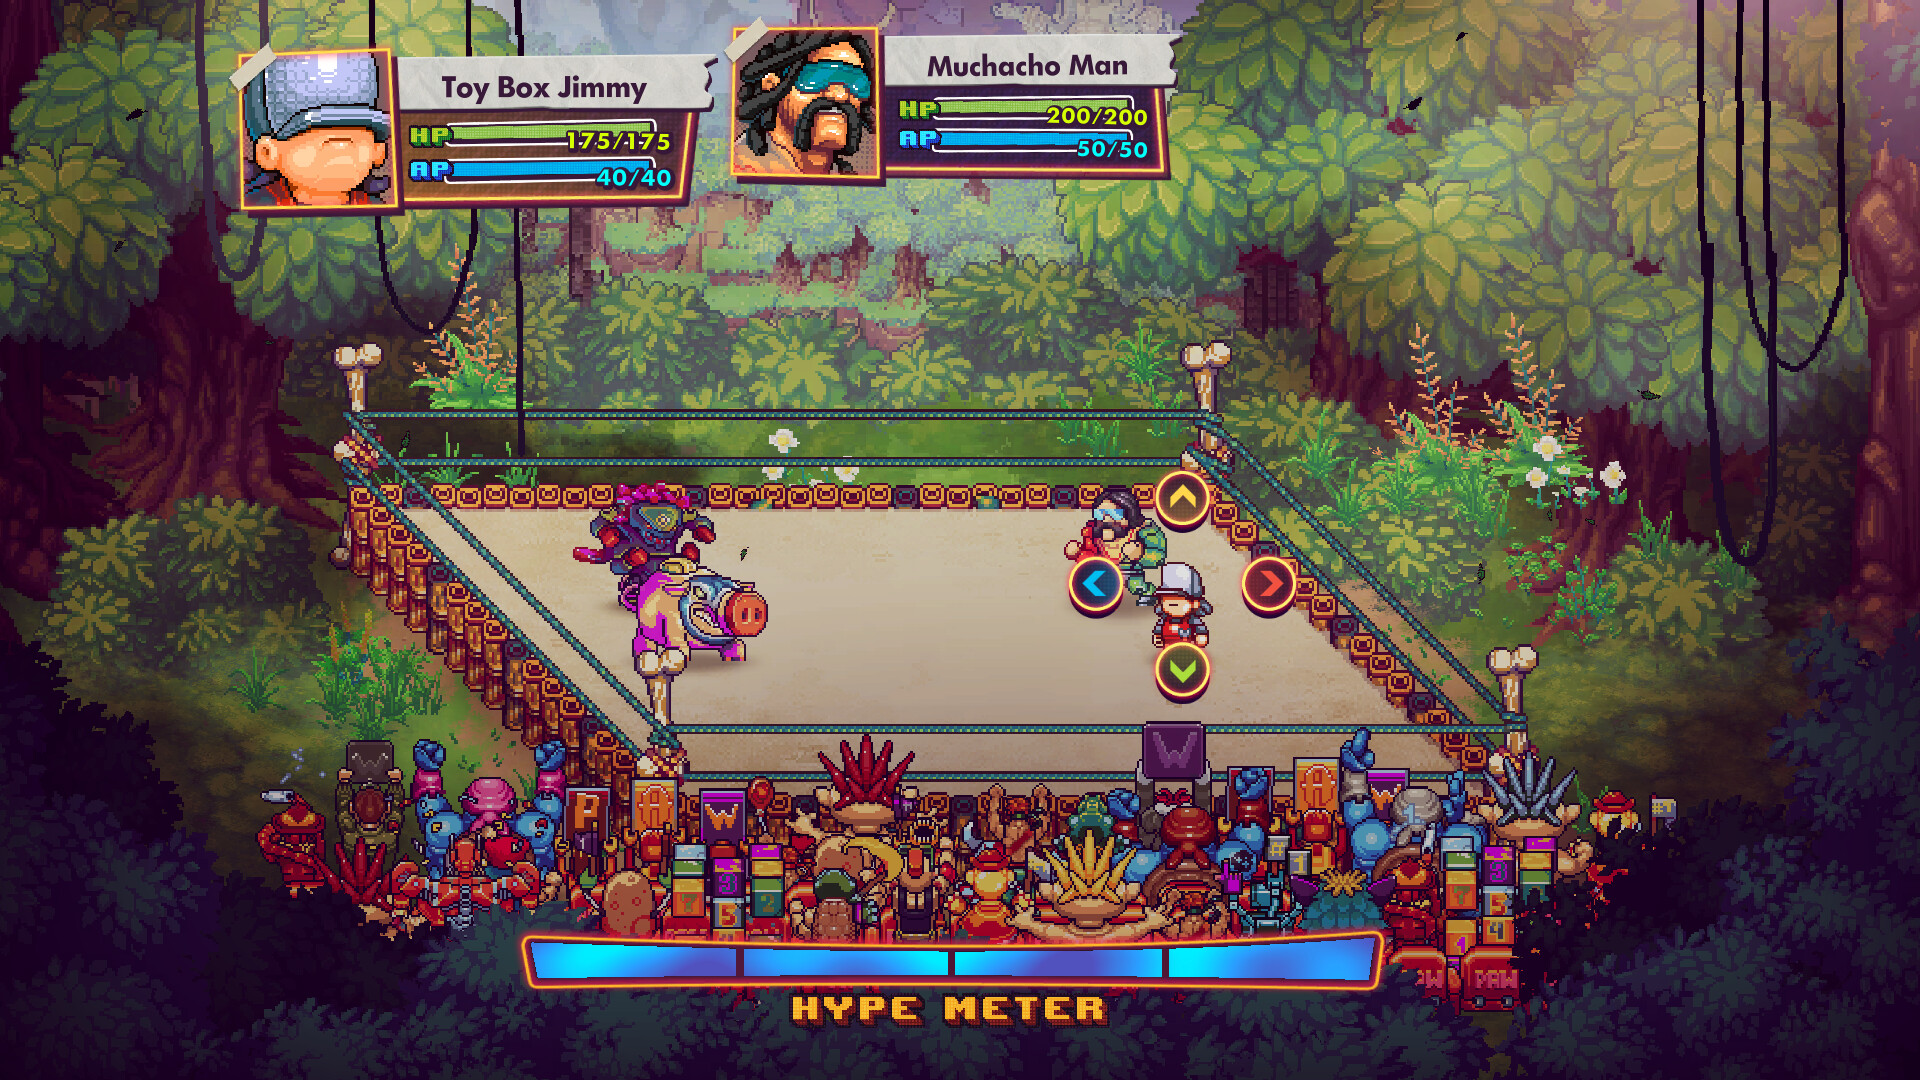 Wrestlers square off in a ring in Wrestlequest.